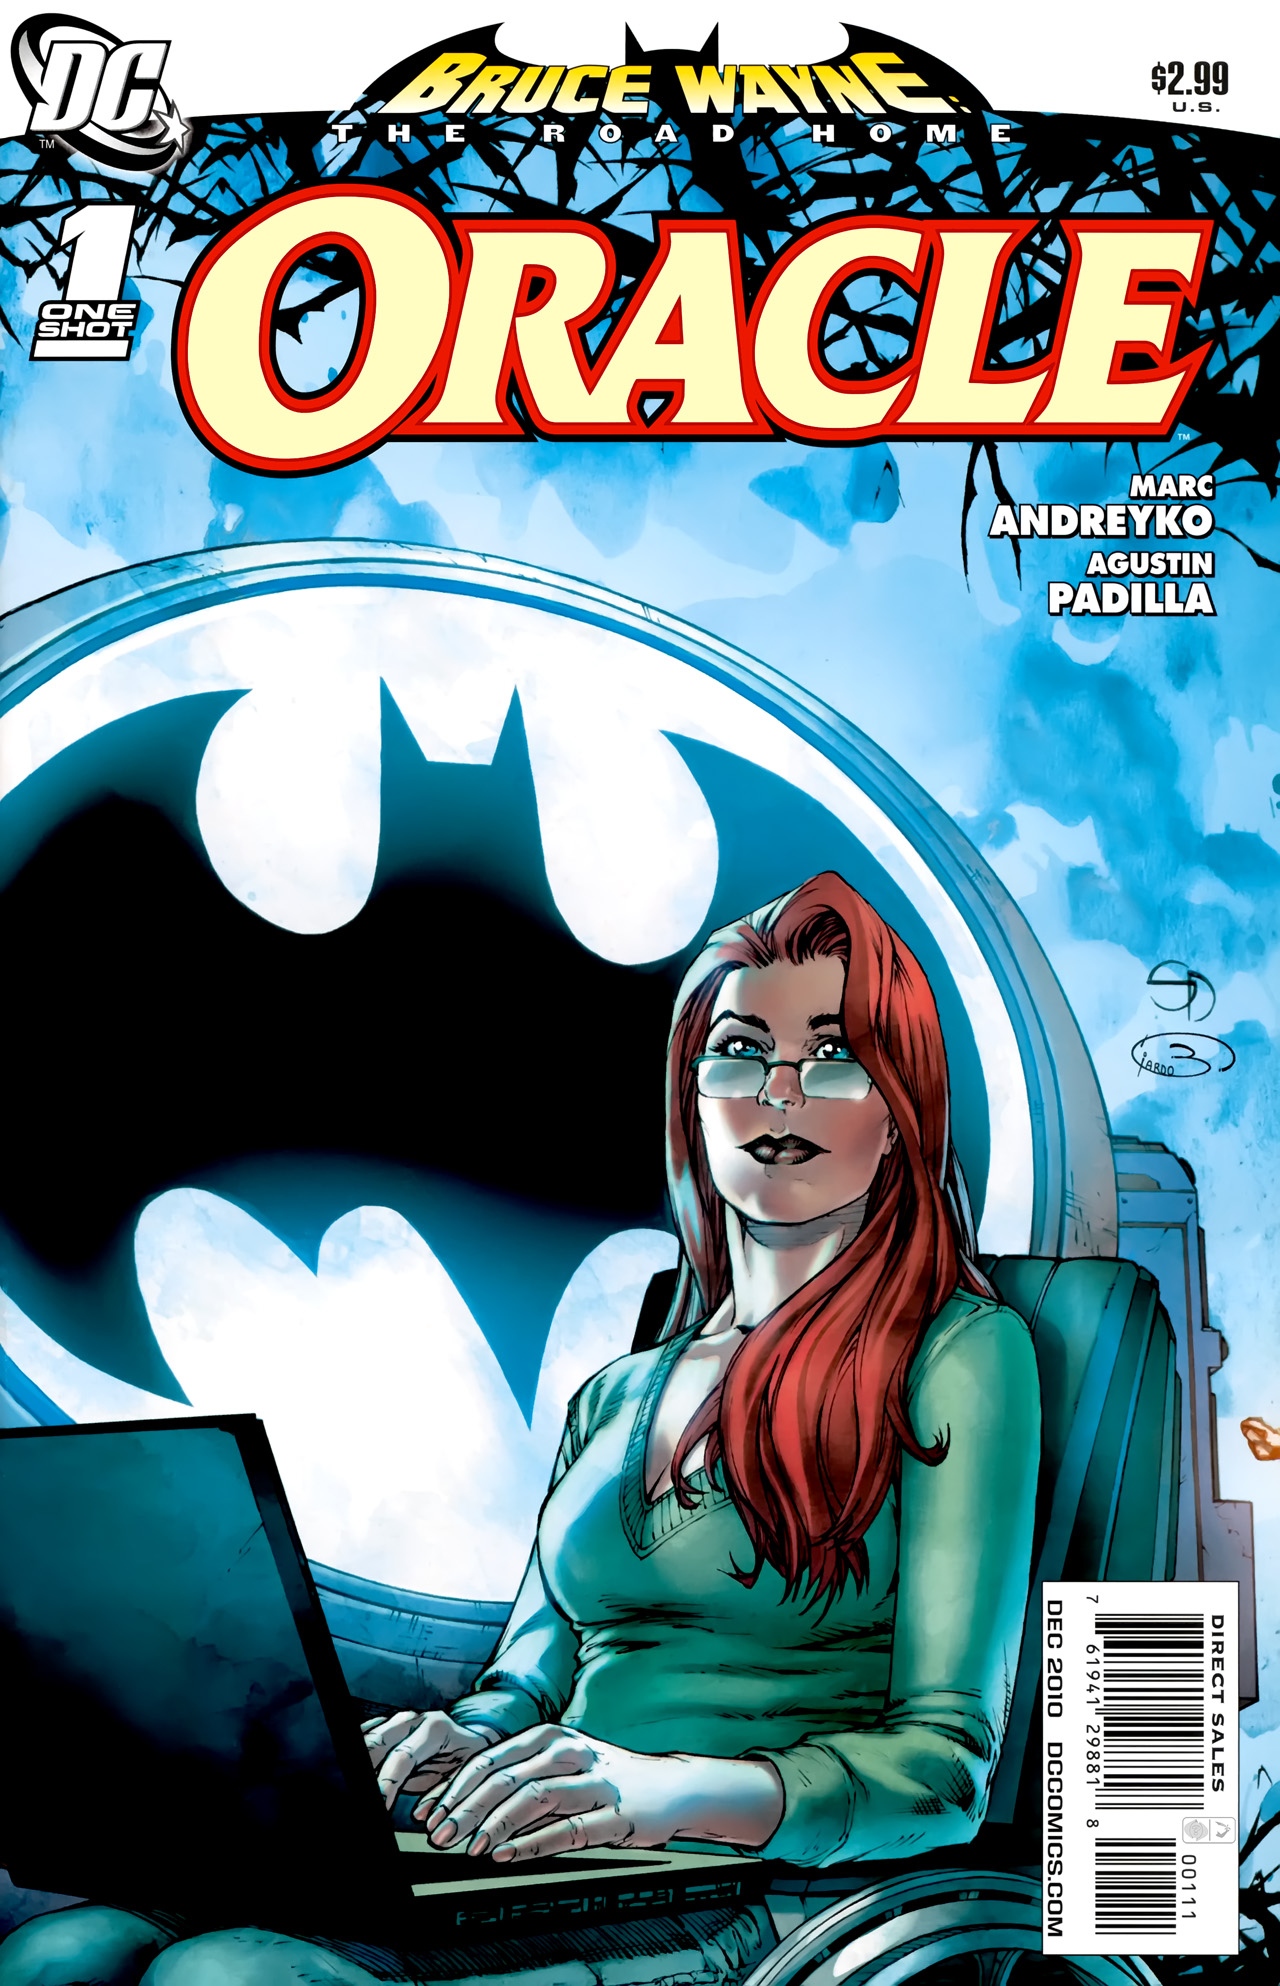 Read online Bruce Wayne: The Road Home comic -  Issue # Issue Oracle - 1